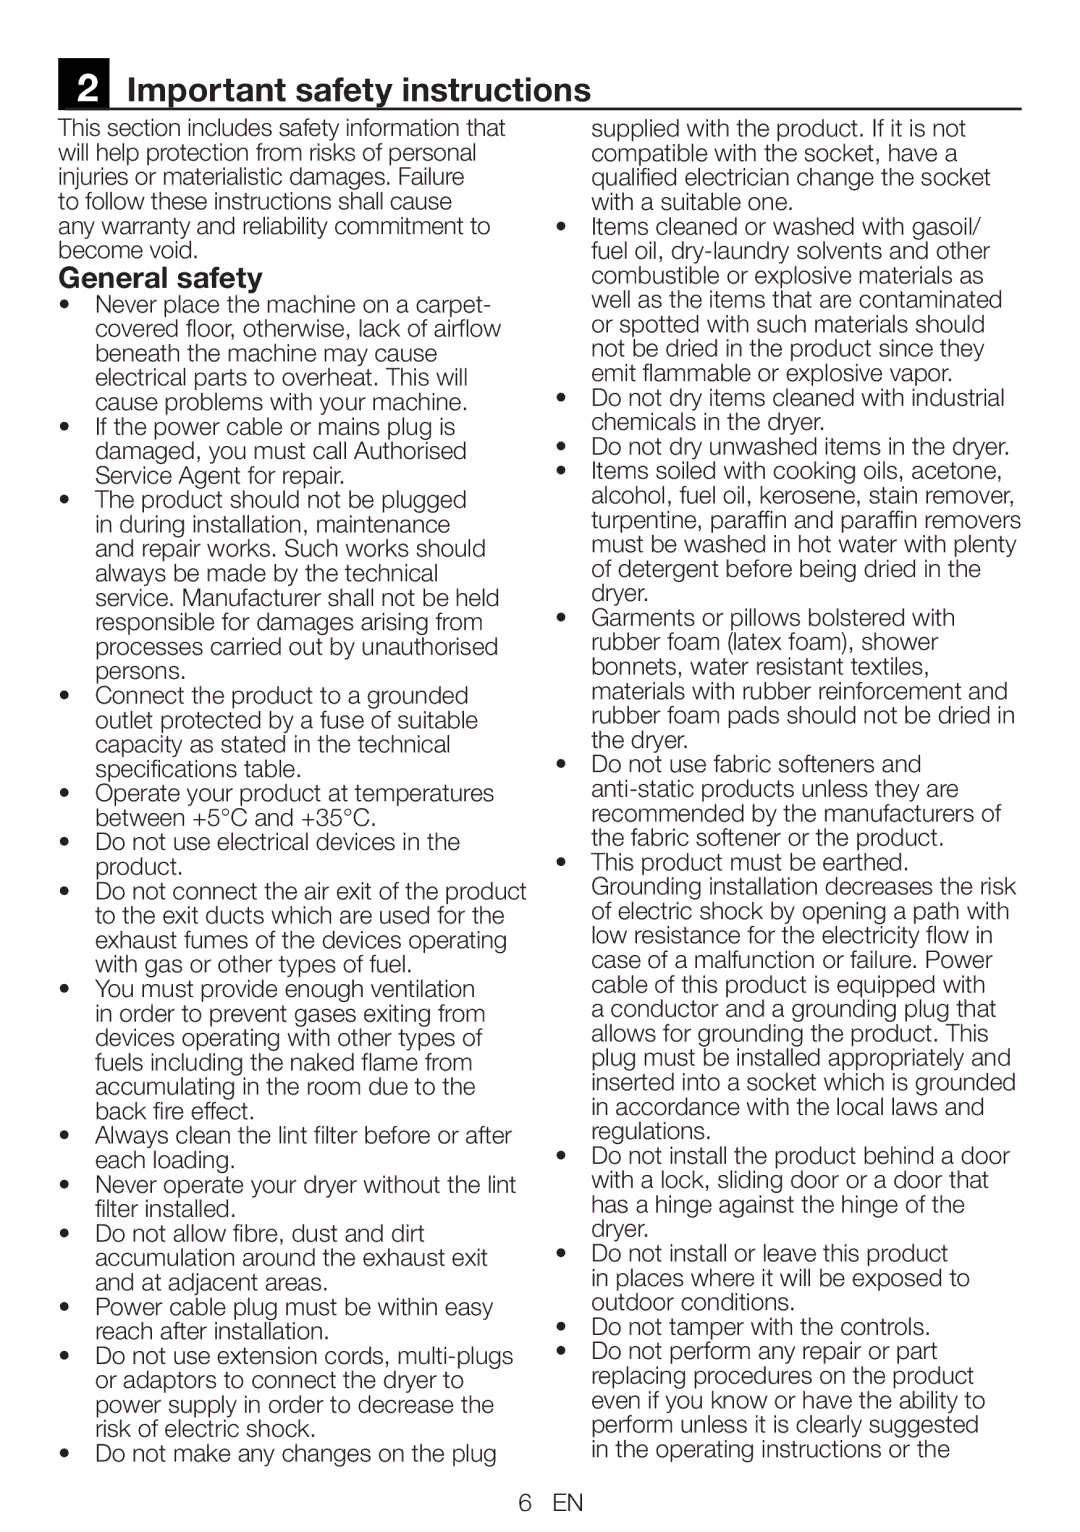 Beko DCU 7230 manual Important safety instructions, General safety, Do not use electrical devices in the product 